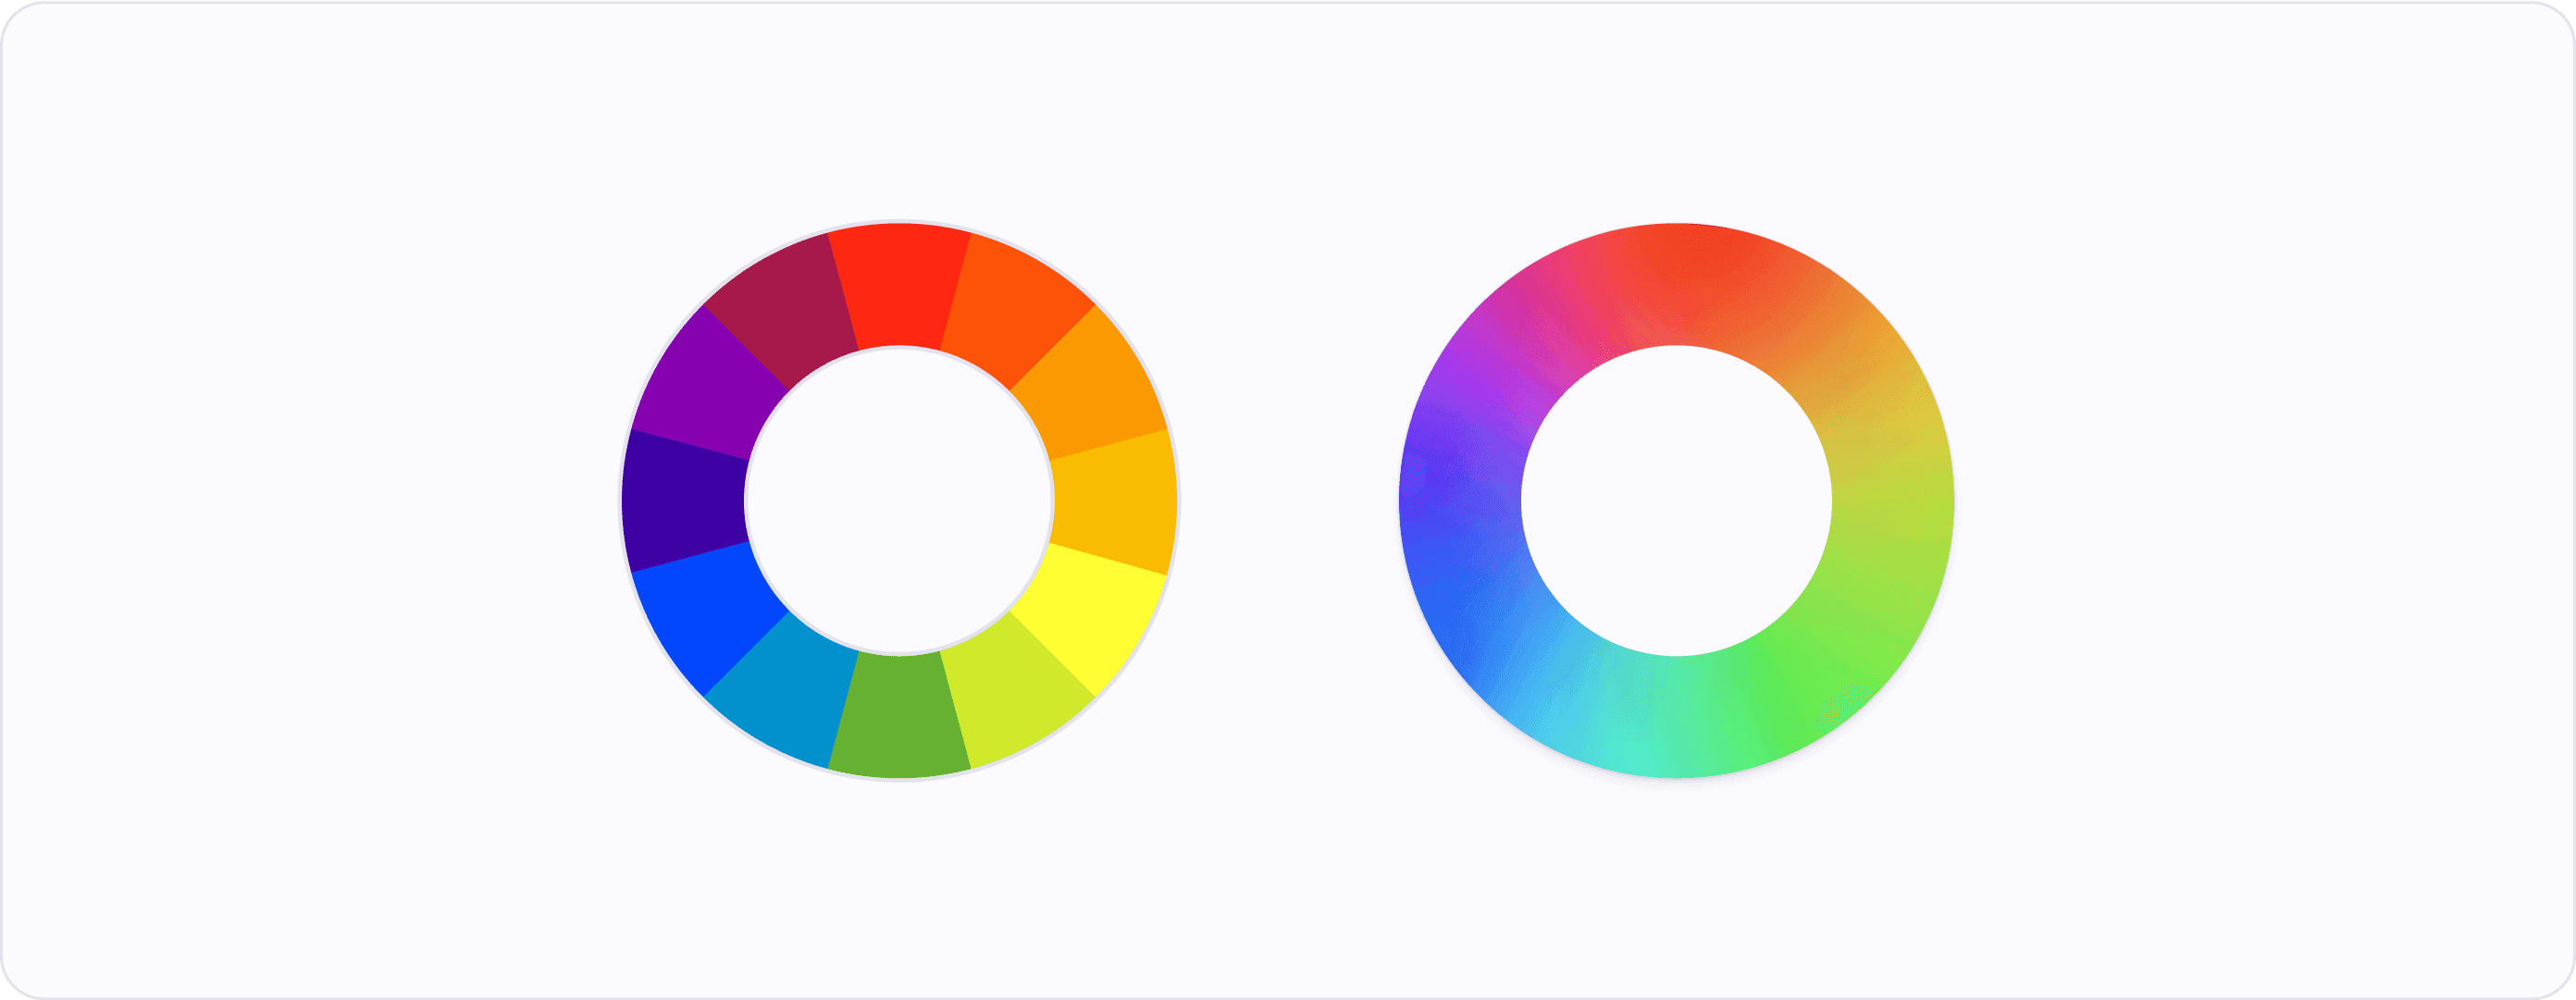 The traditional color wheel described in color theory compared to a realistic color wheel (spectrum)